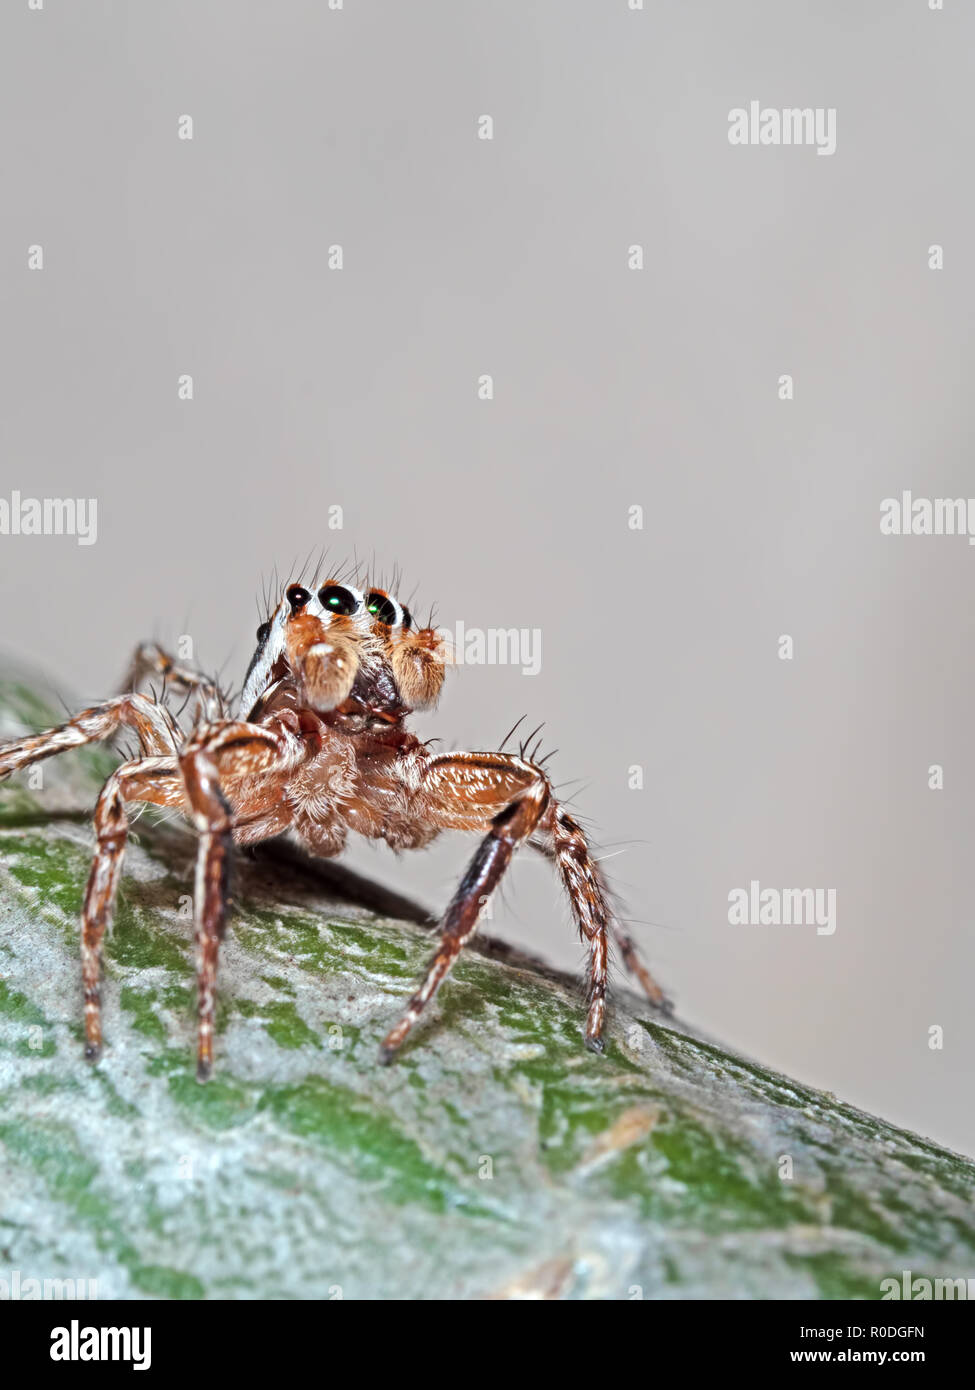 Macro Photography of Jumping Spider on Trunk of Little Plant Stock Photo